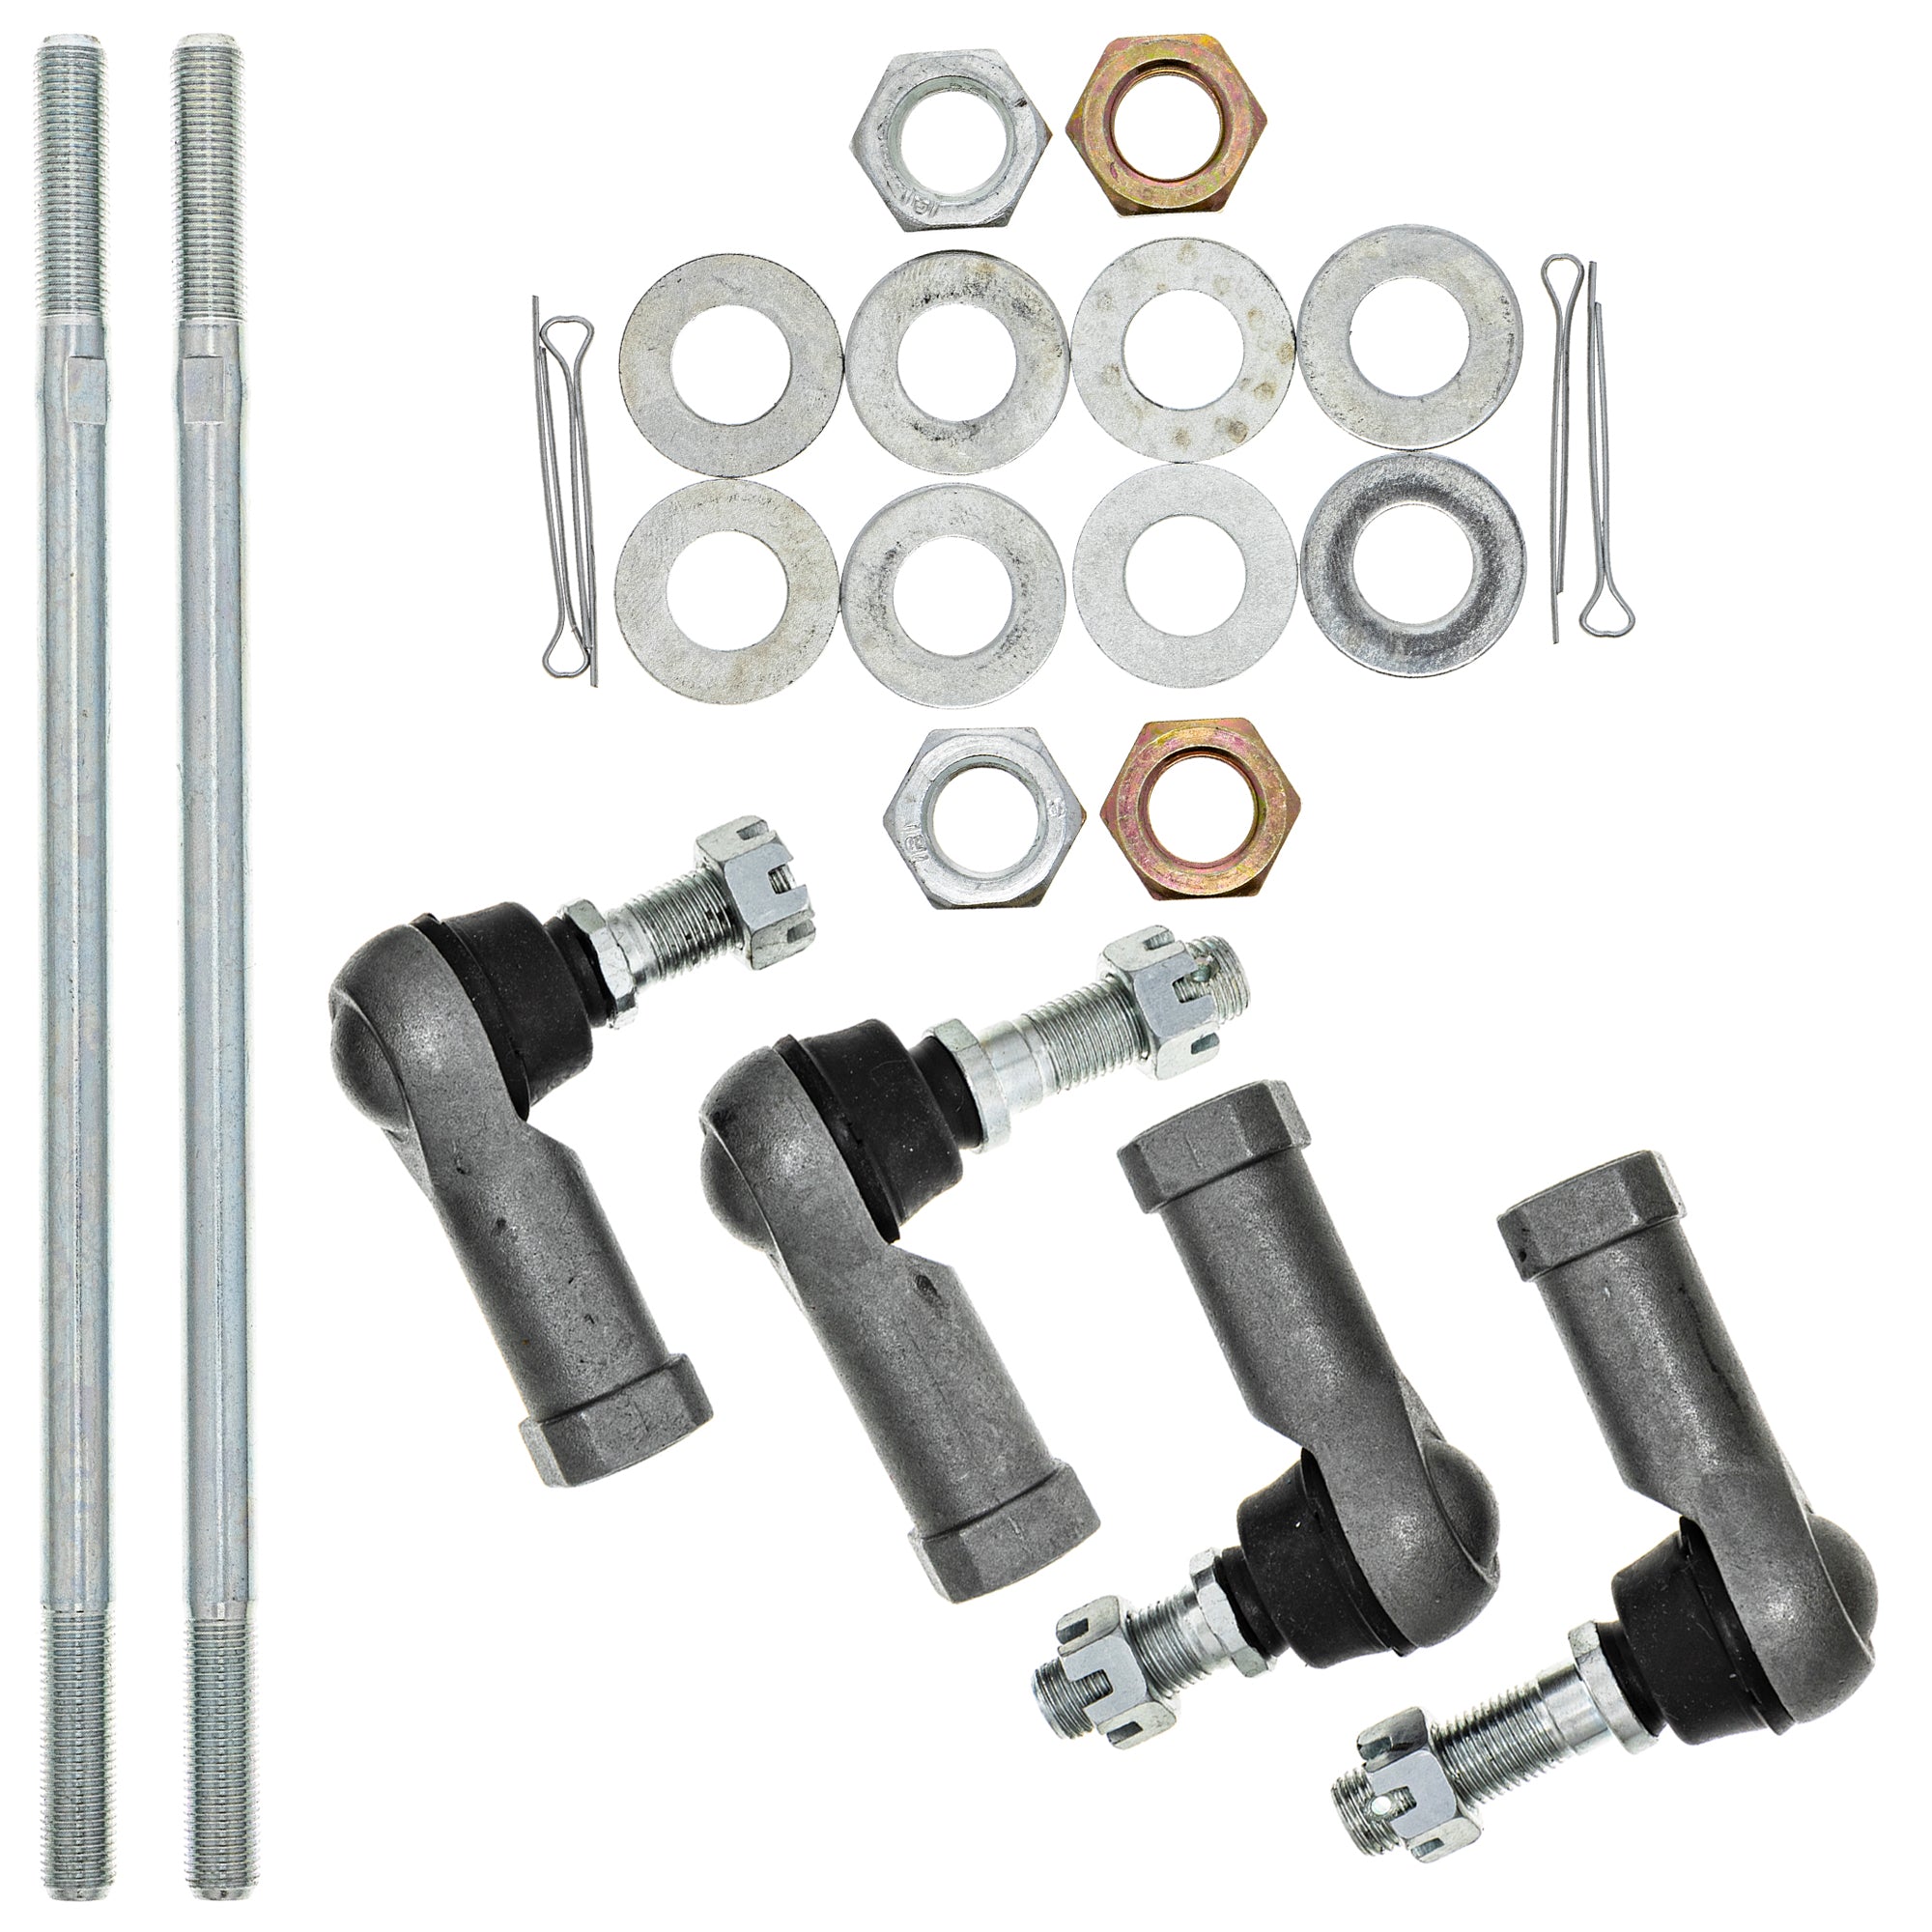 Tie Rods & Tie Rods Ends Kit for zOTHER Polaris BRP Can-Am Ski-Doo Sea-Doo Renegade NICHE MK1006289